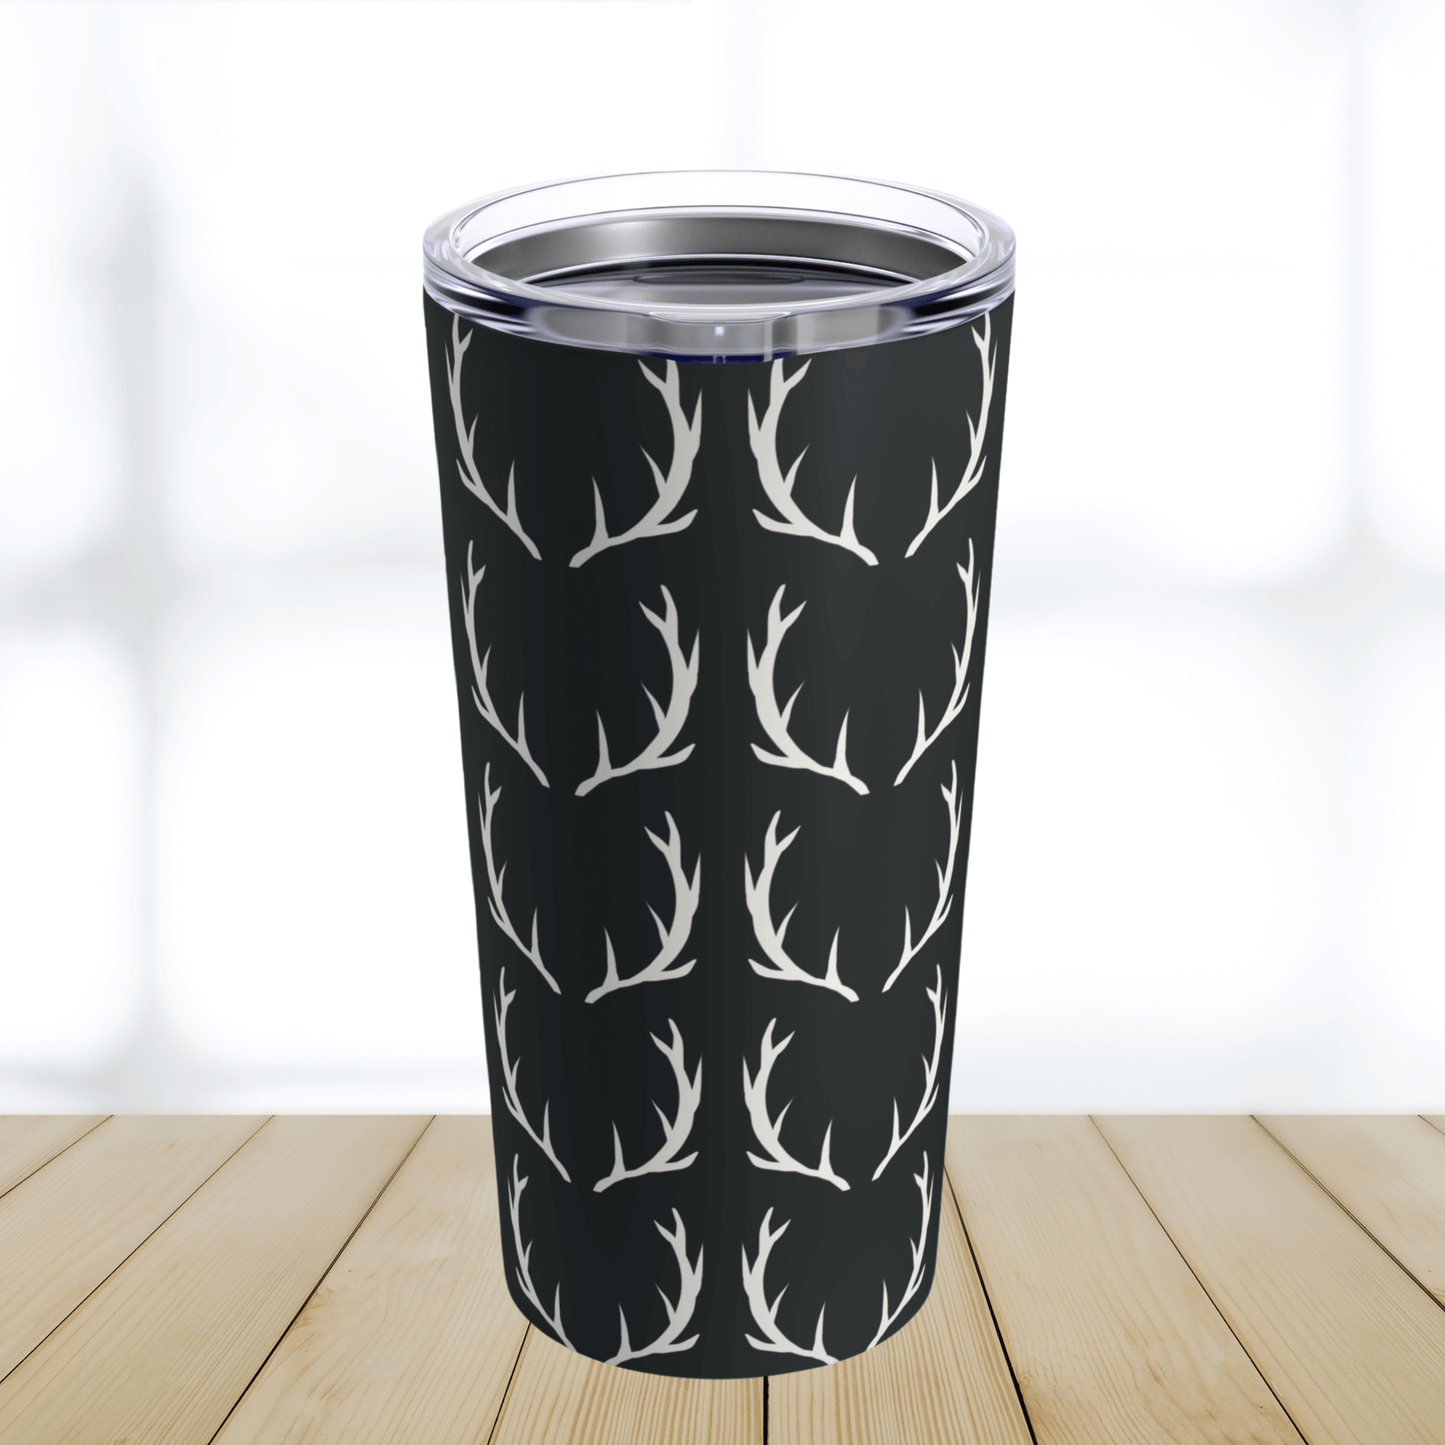 Our tumbler cup for deer hunters can be ordered without monogrammed initials as shown here. This deer antler travel cup is the perfect personalized tumbler for men with deer hunting interests.